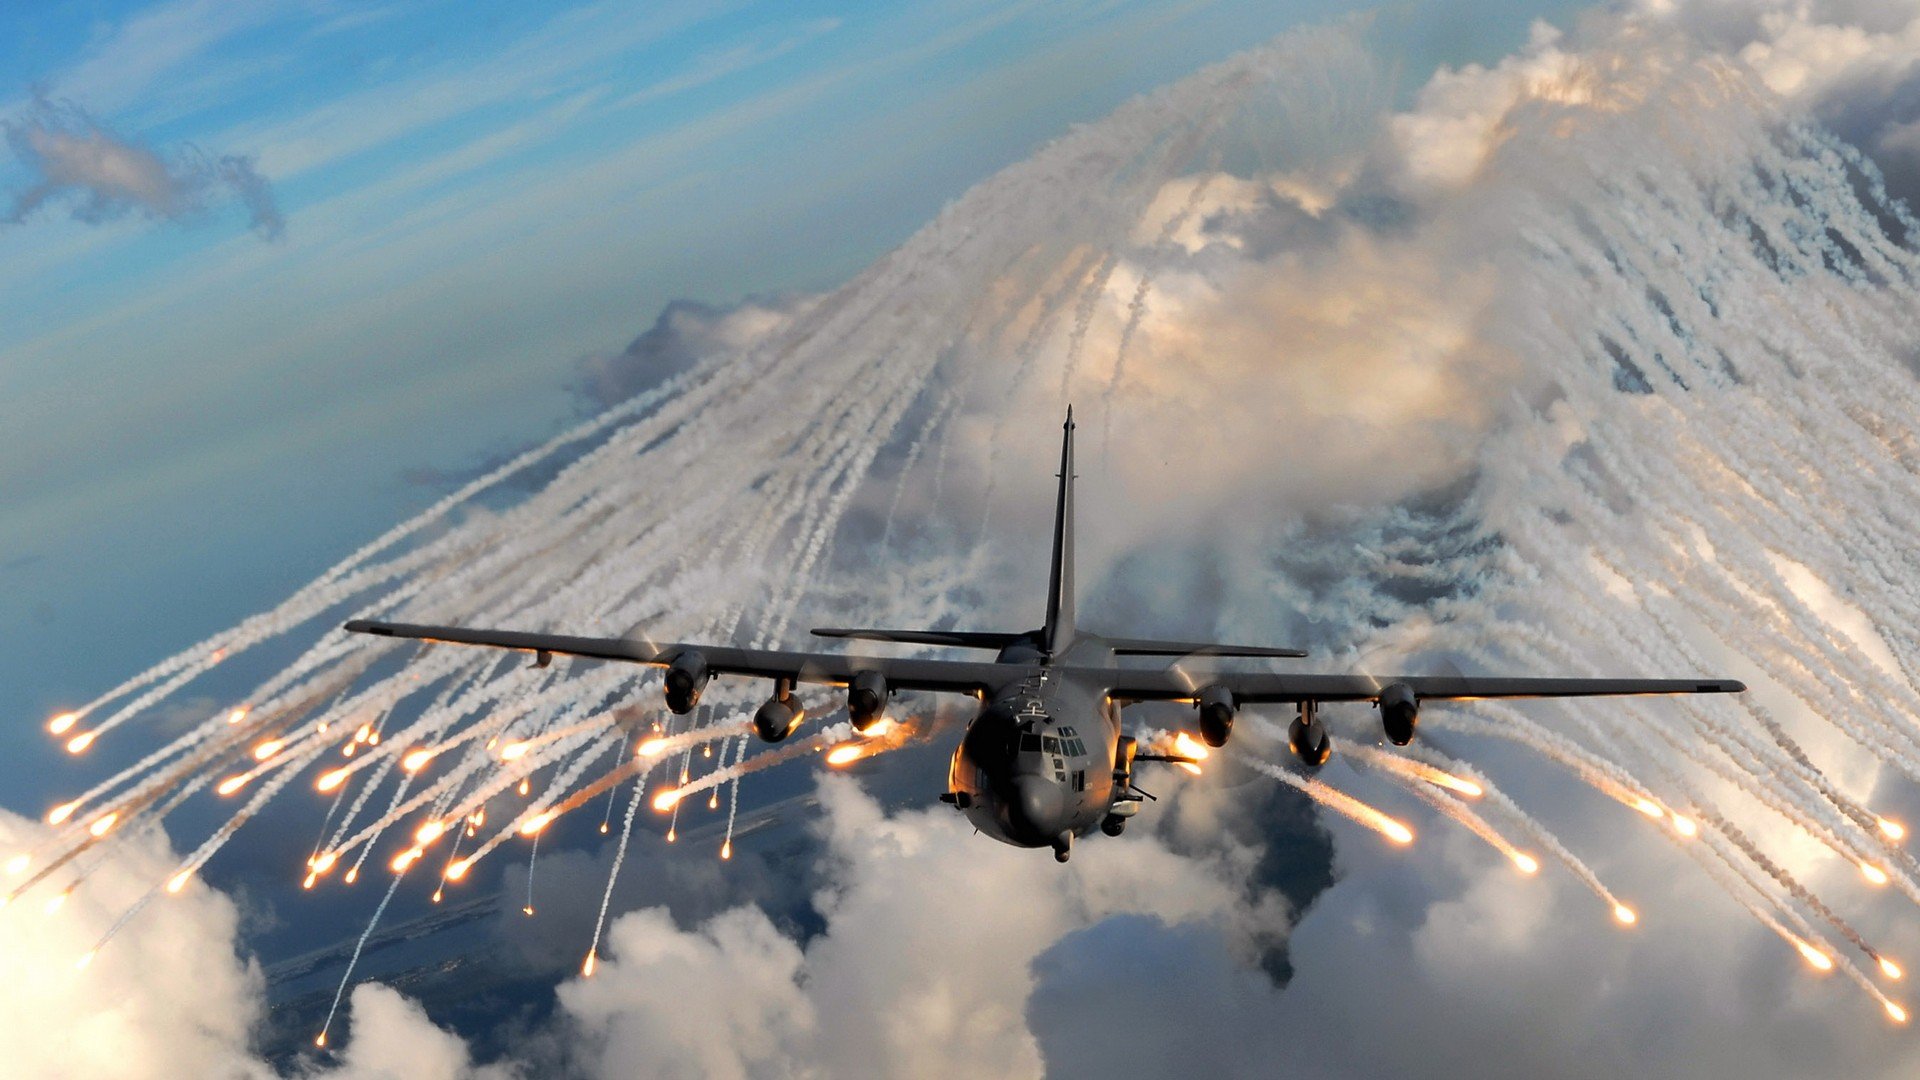 clouds, Aircraft, War, Flares, Contrails, Skyscapes, Attack Wallpaper